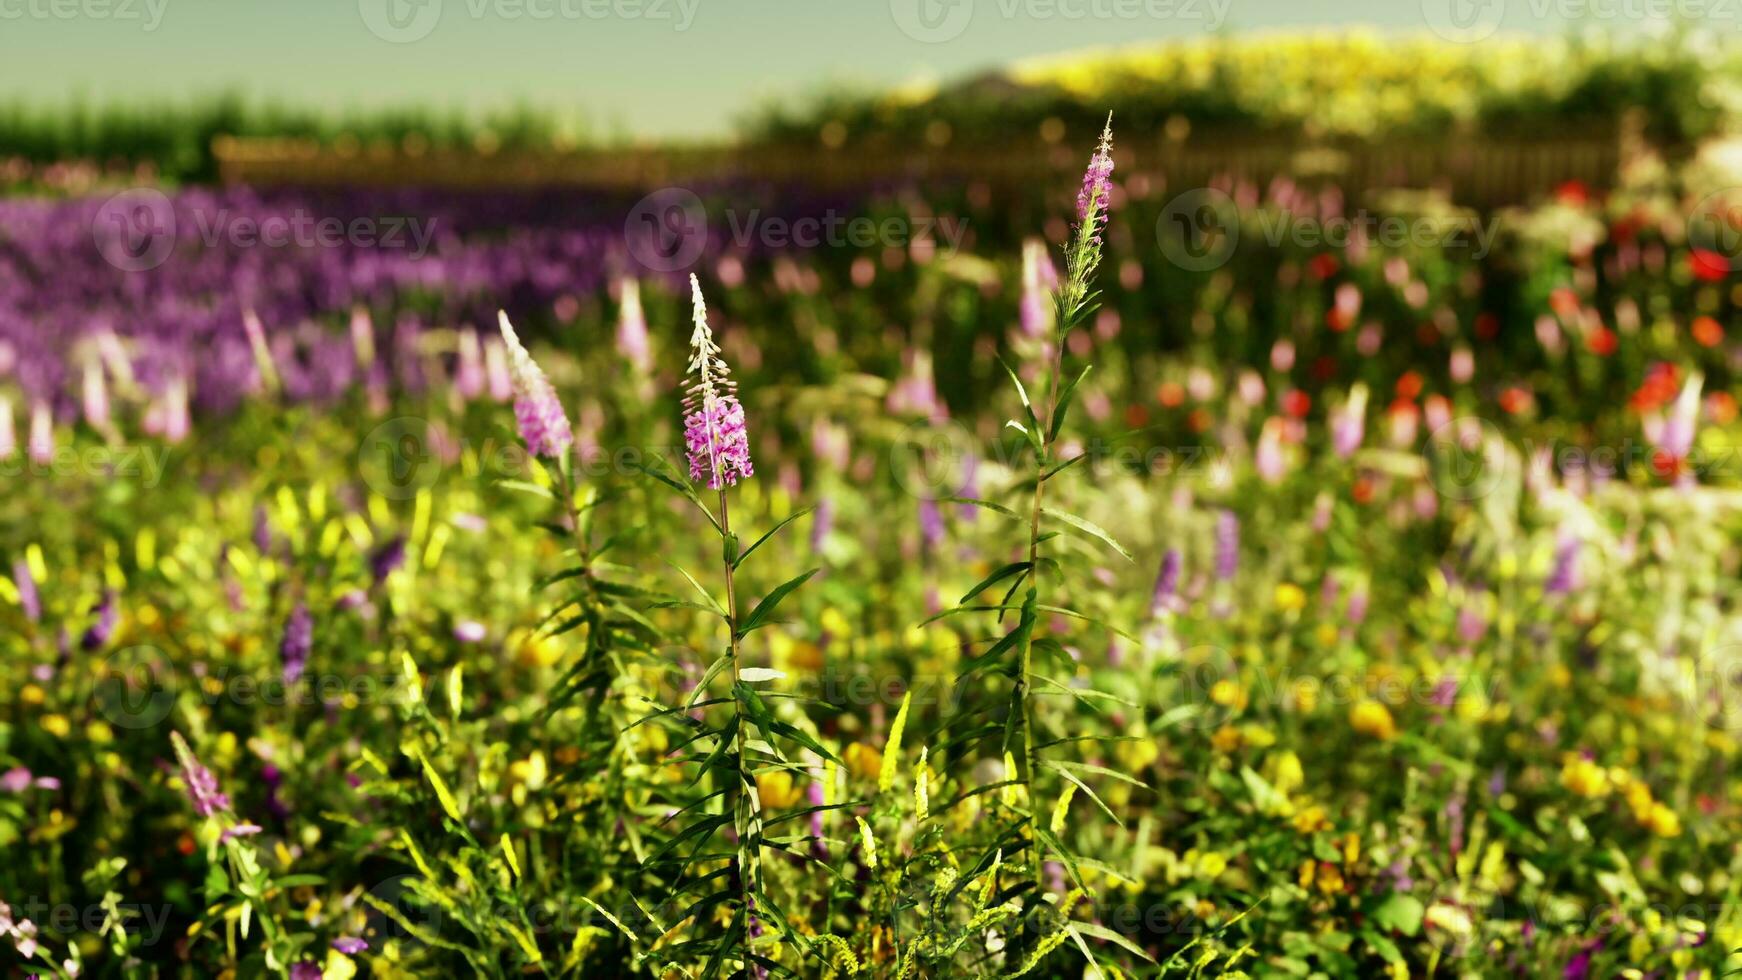 A vibrant field with a colorful array of purple and yellow flowers photo